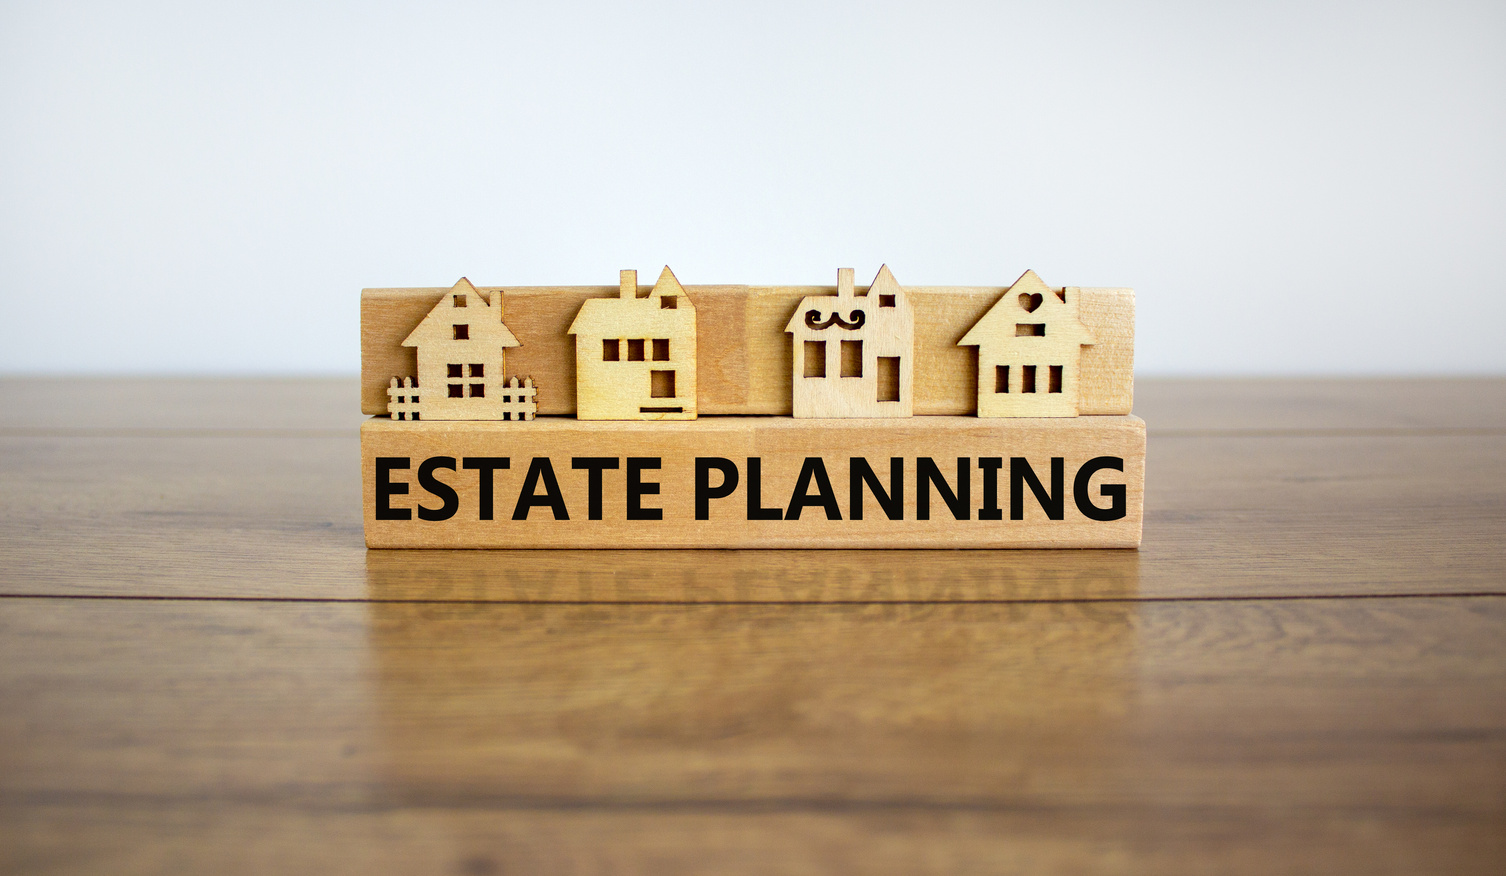 Wooden blocks form the words 'estate planning', miniature house, wooden table. Beautiful white background, copy space. Business and estate planning concept.